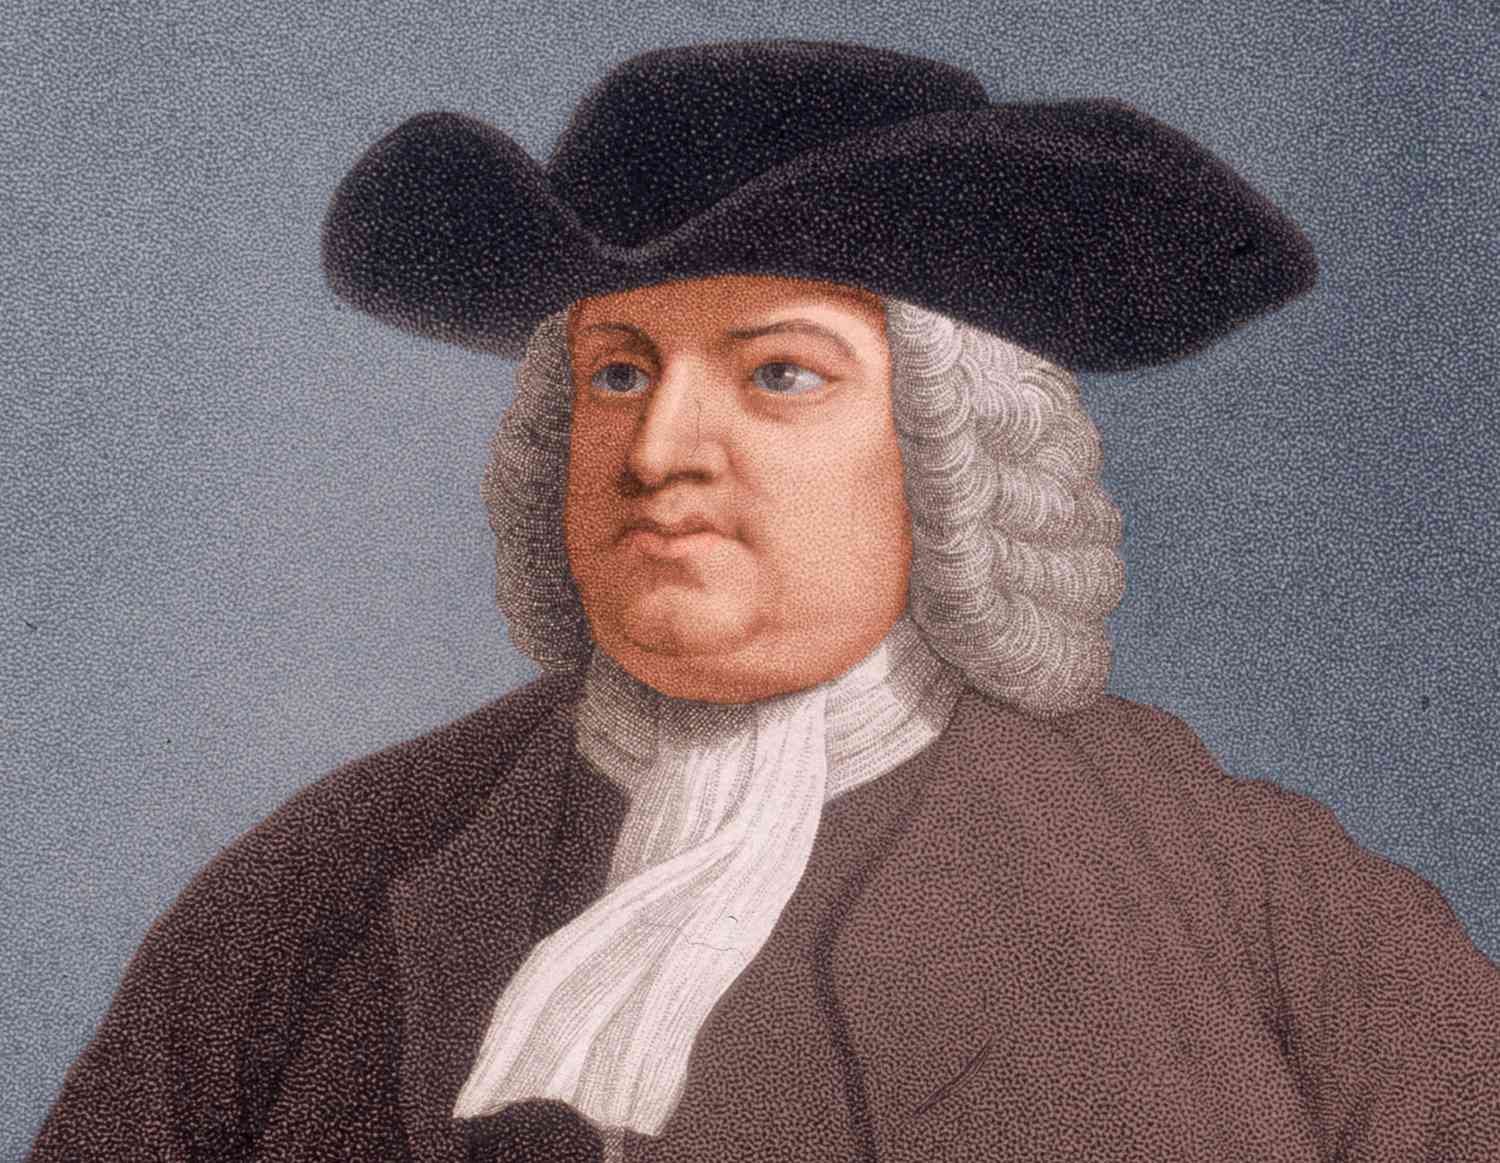 William Penn: The Founder of Pennsylvania and the Holy Experimen